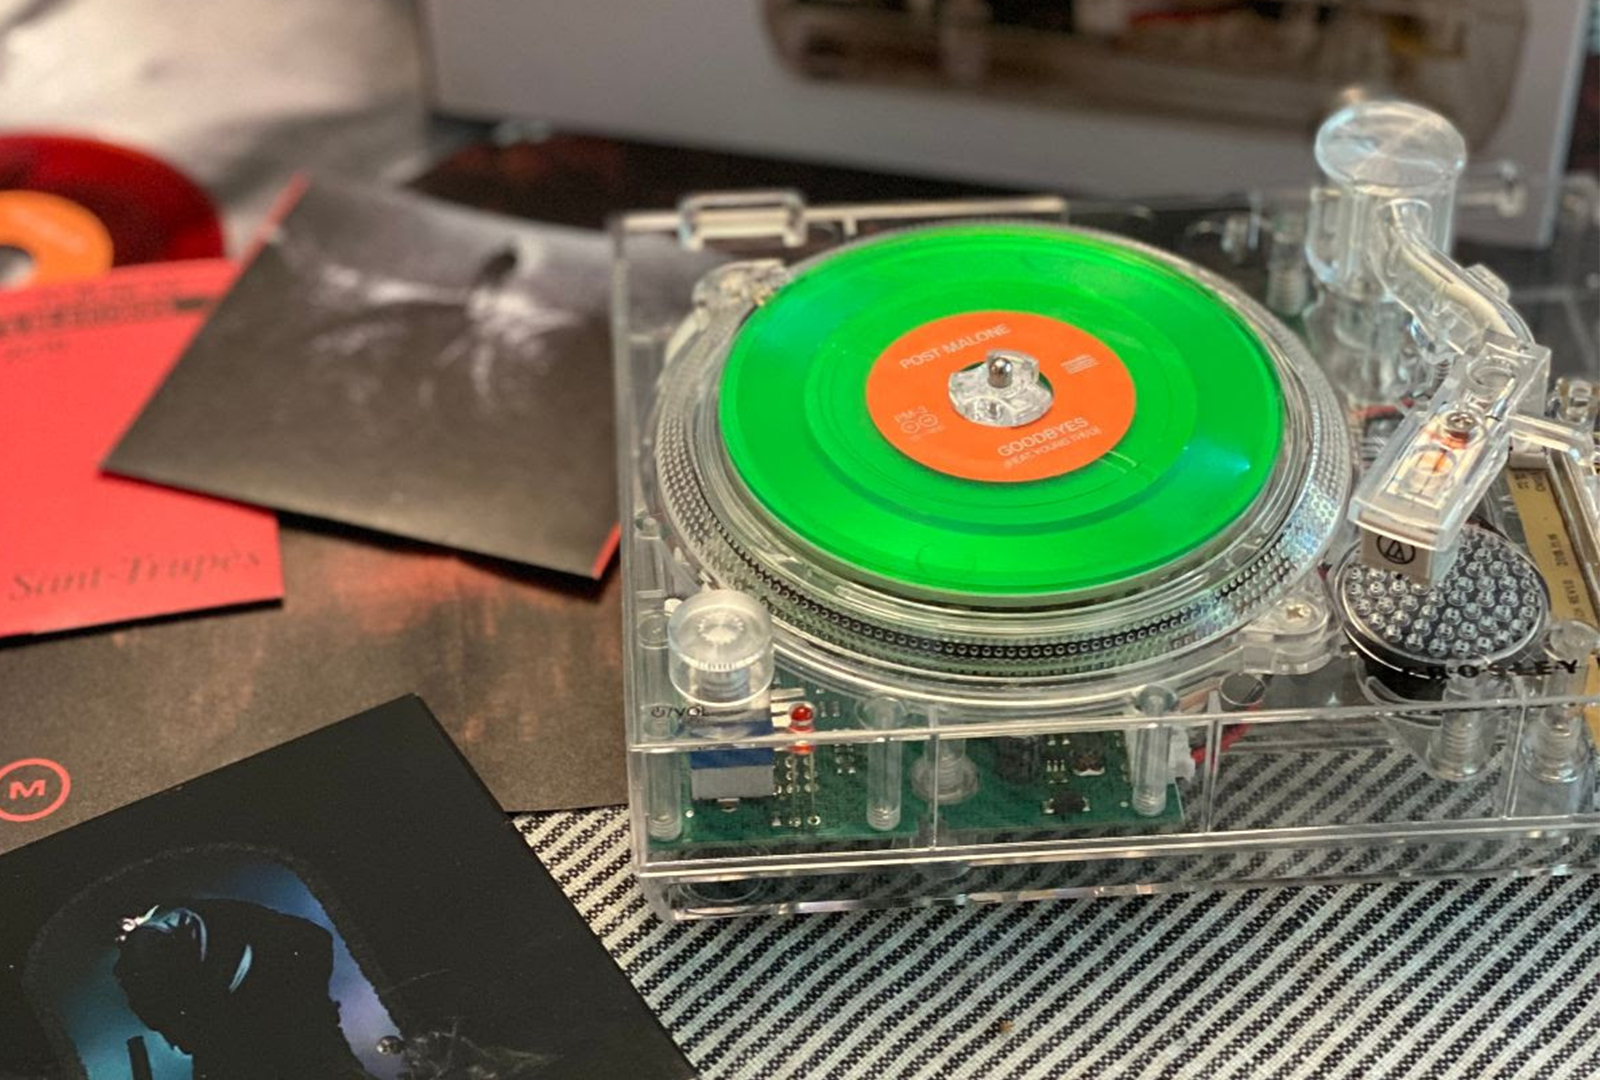 This new translucent mini-turntable plays 3” records